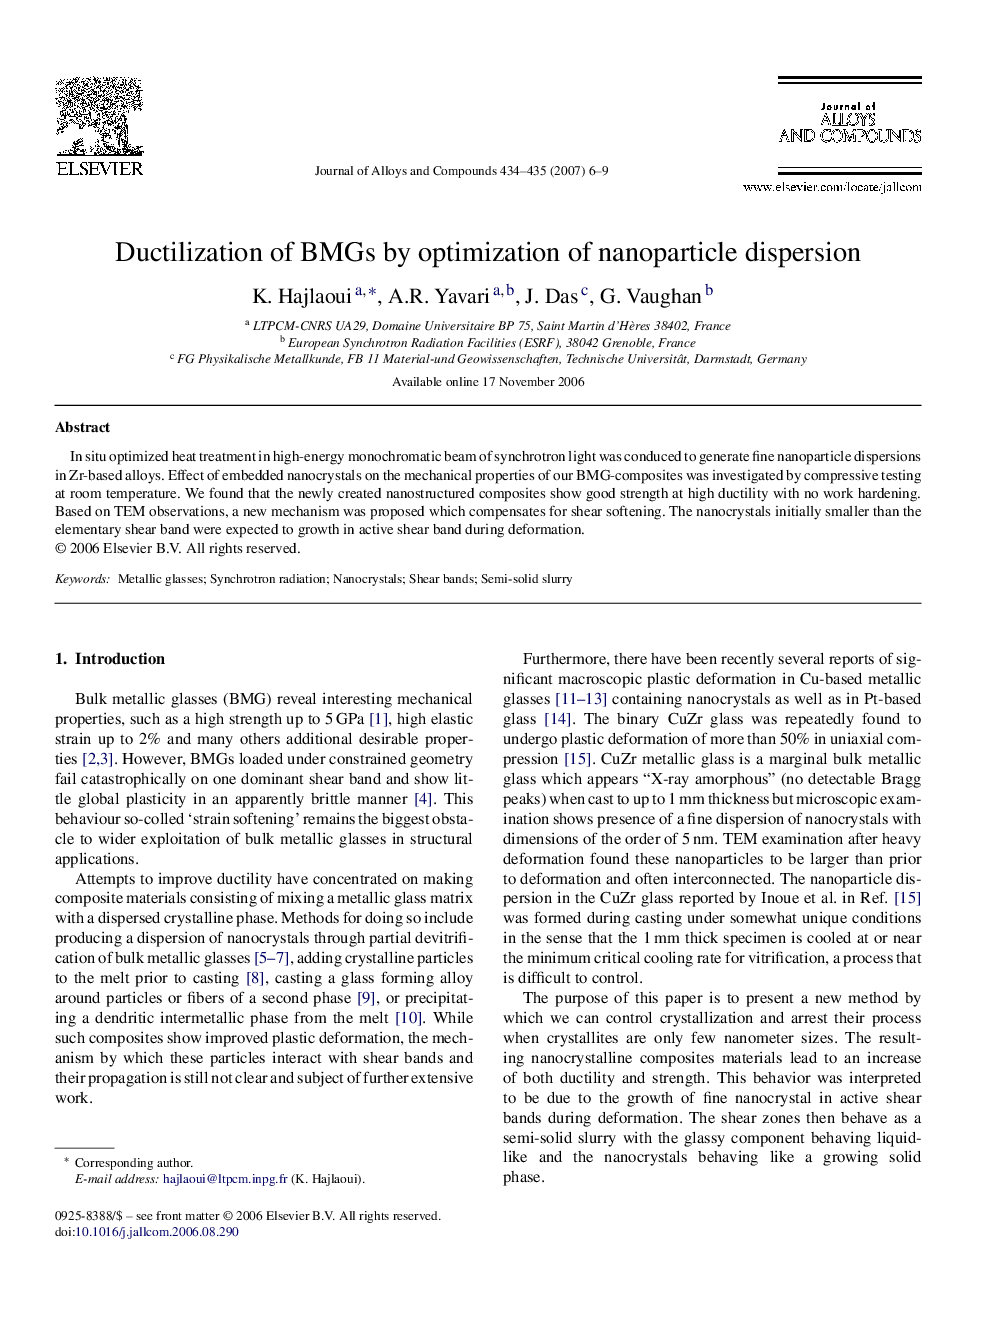 Ductilization of BMGs by optimization of nanoparticle dispersion